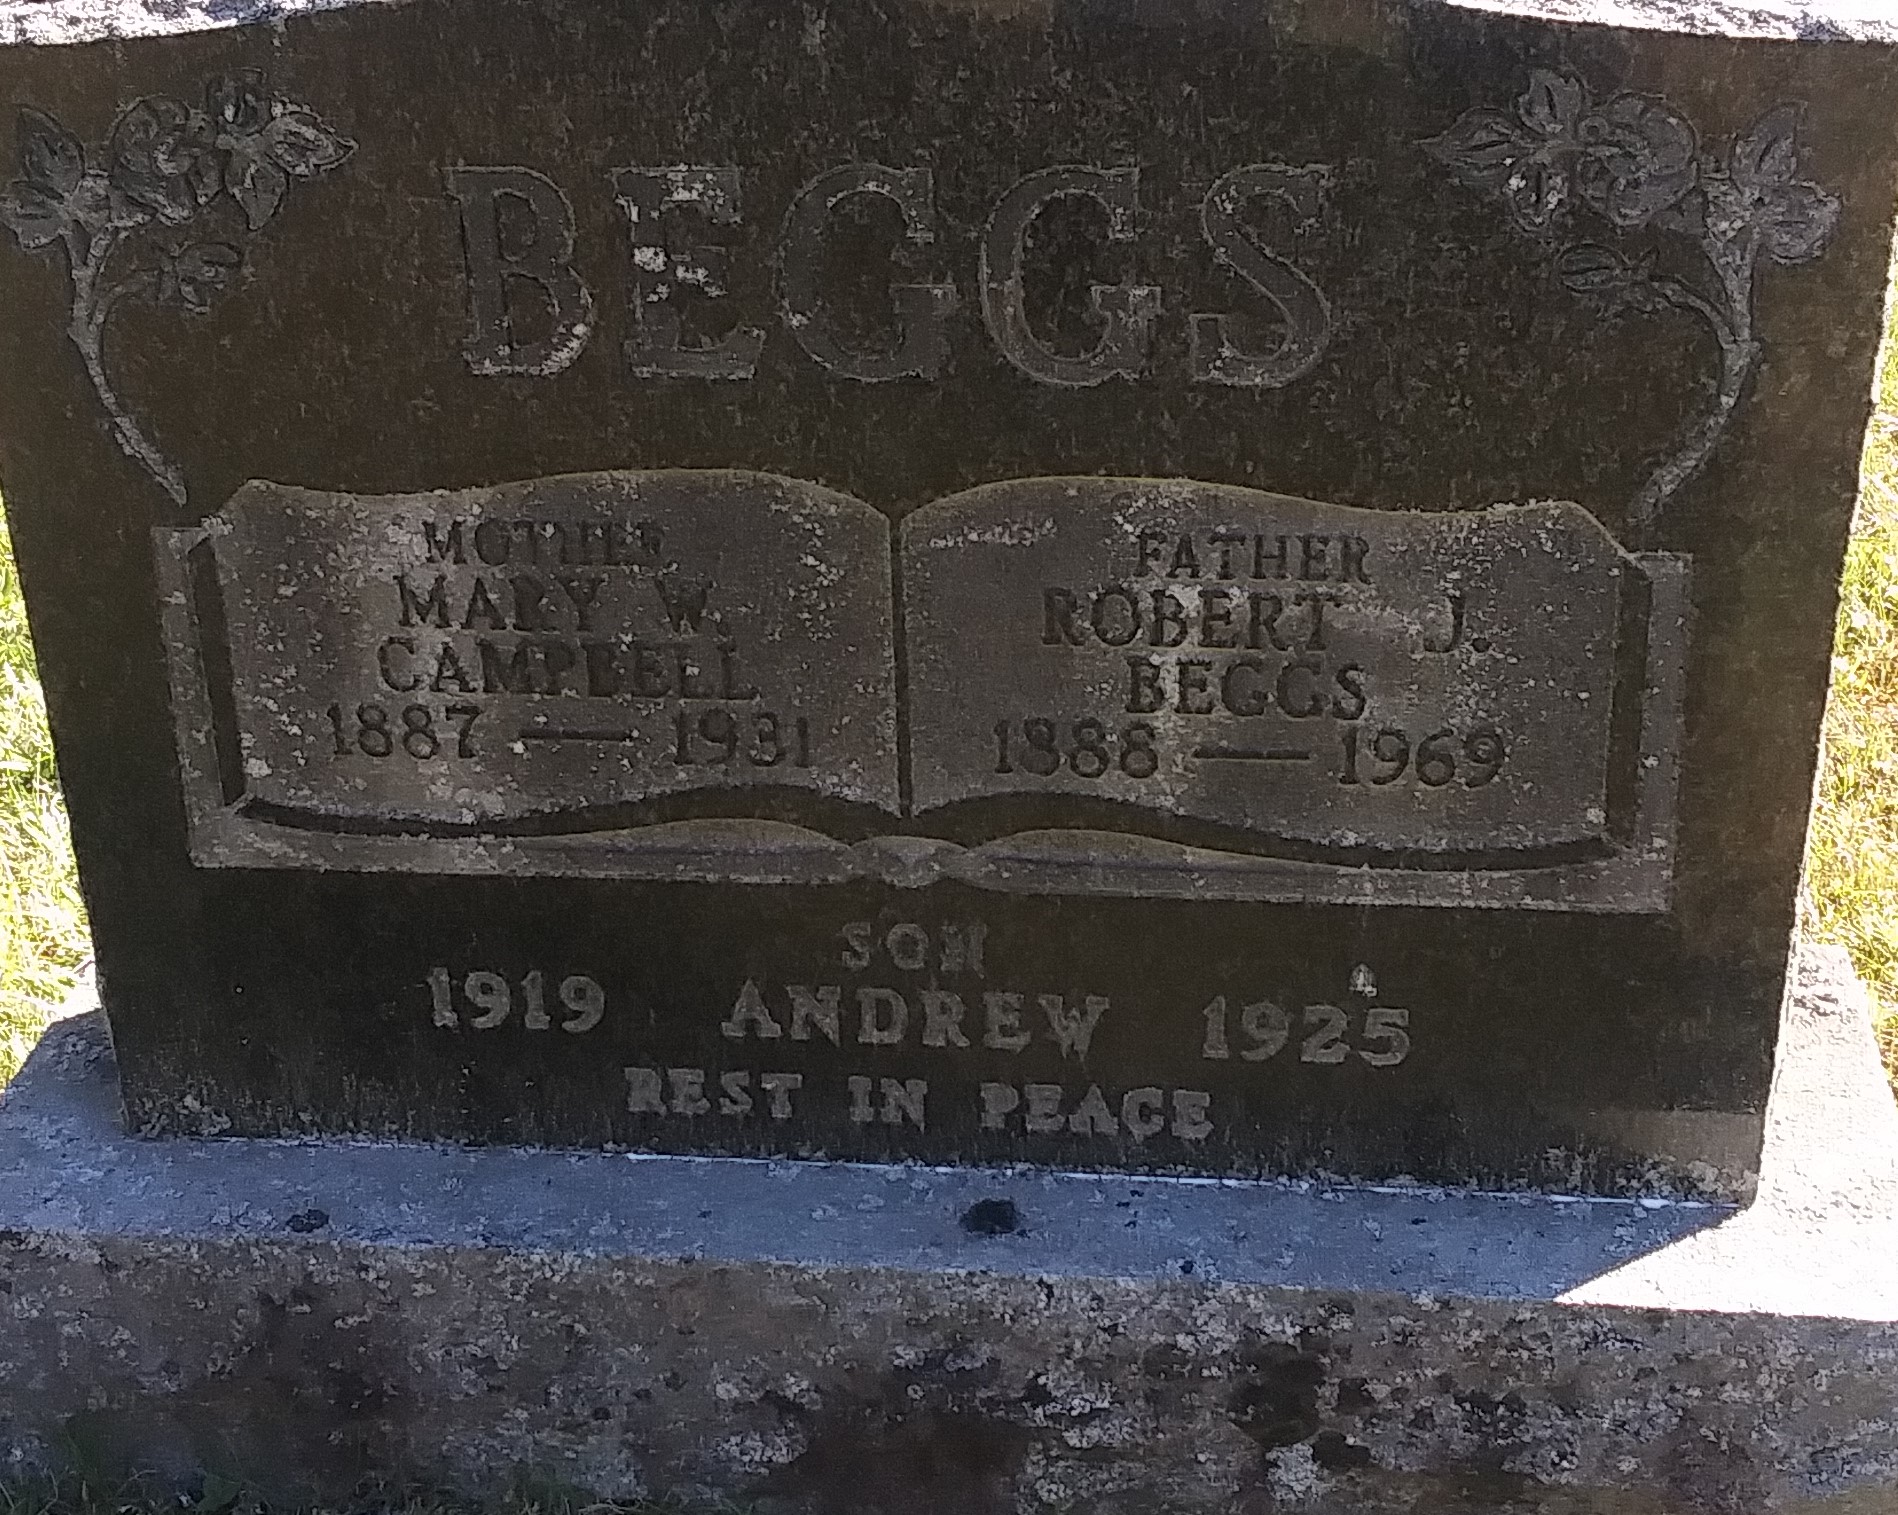 Robert Beggs, Clydesdale United Cemetery